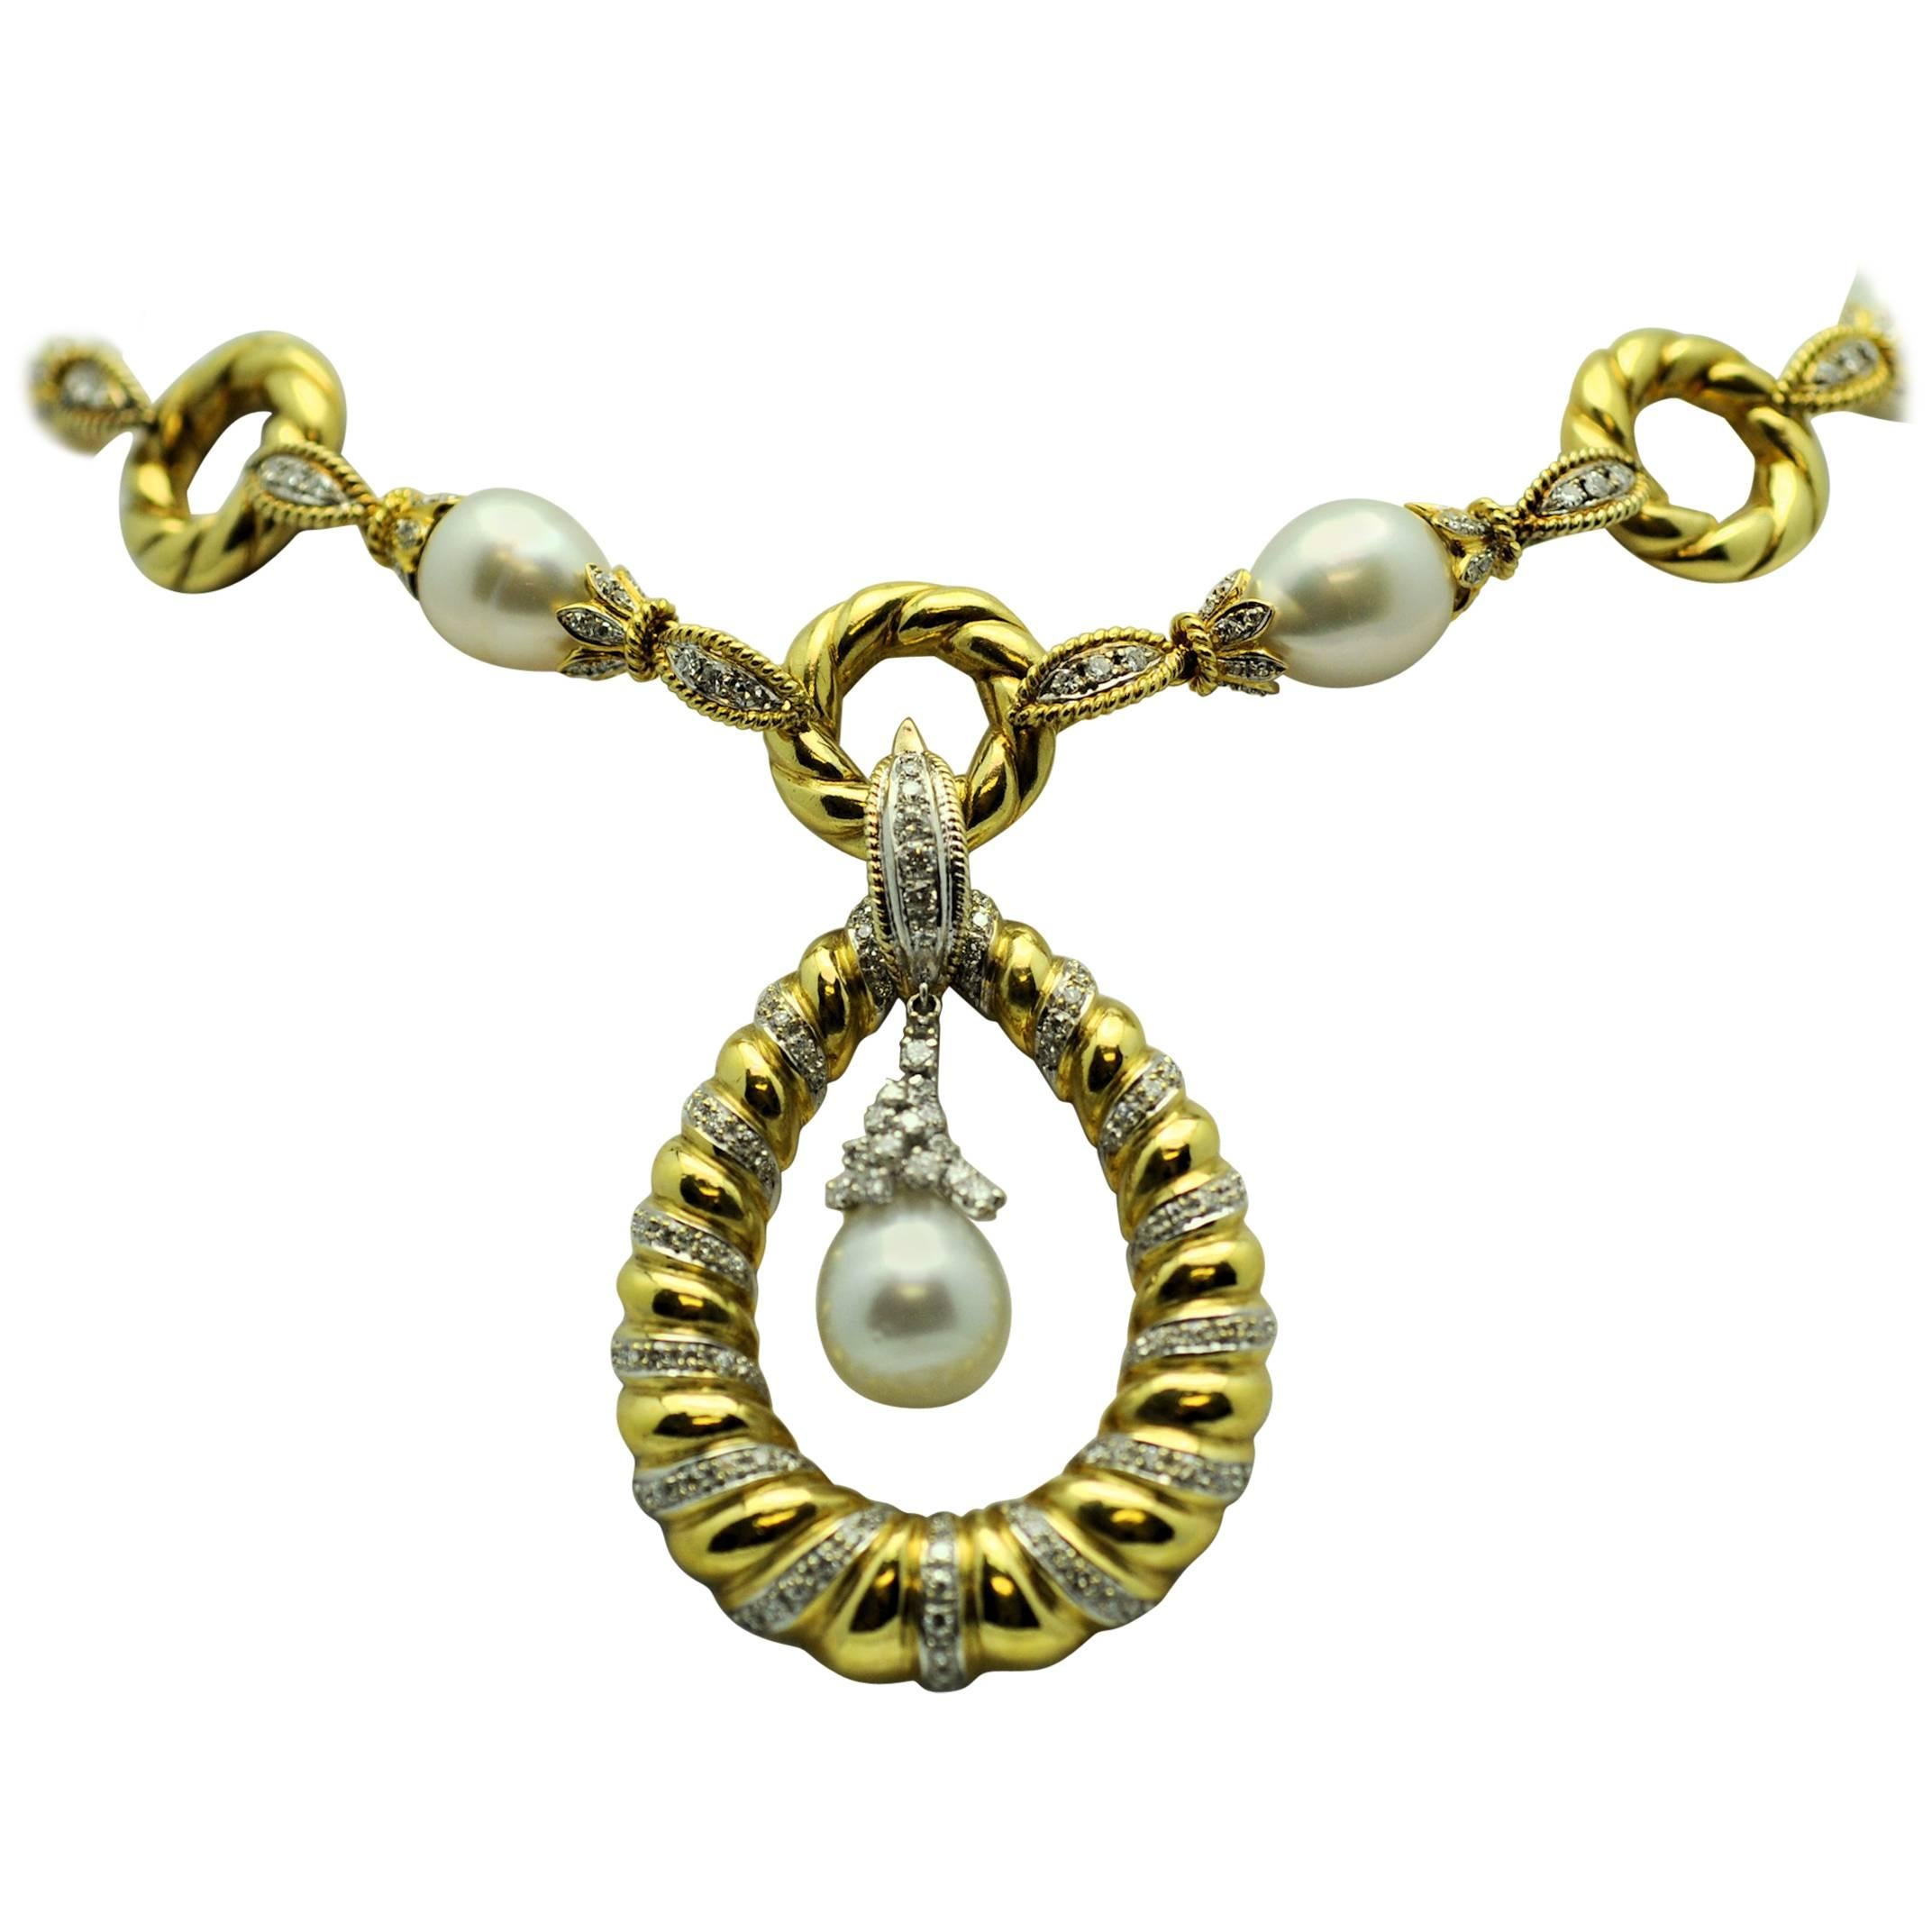 Long South Sea Pearl Diamond Gold Necklace with Pendant